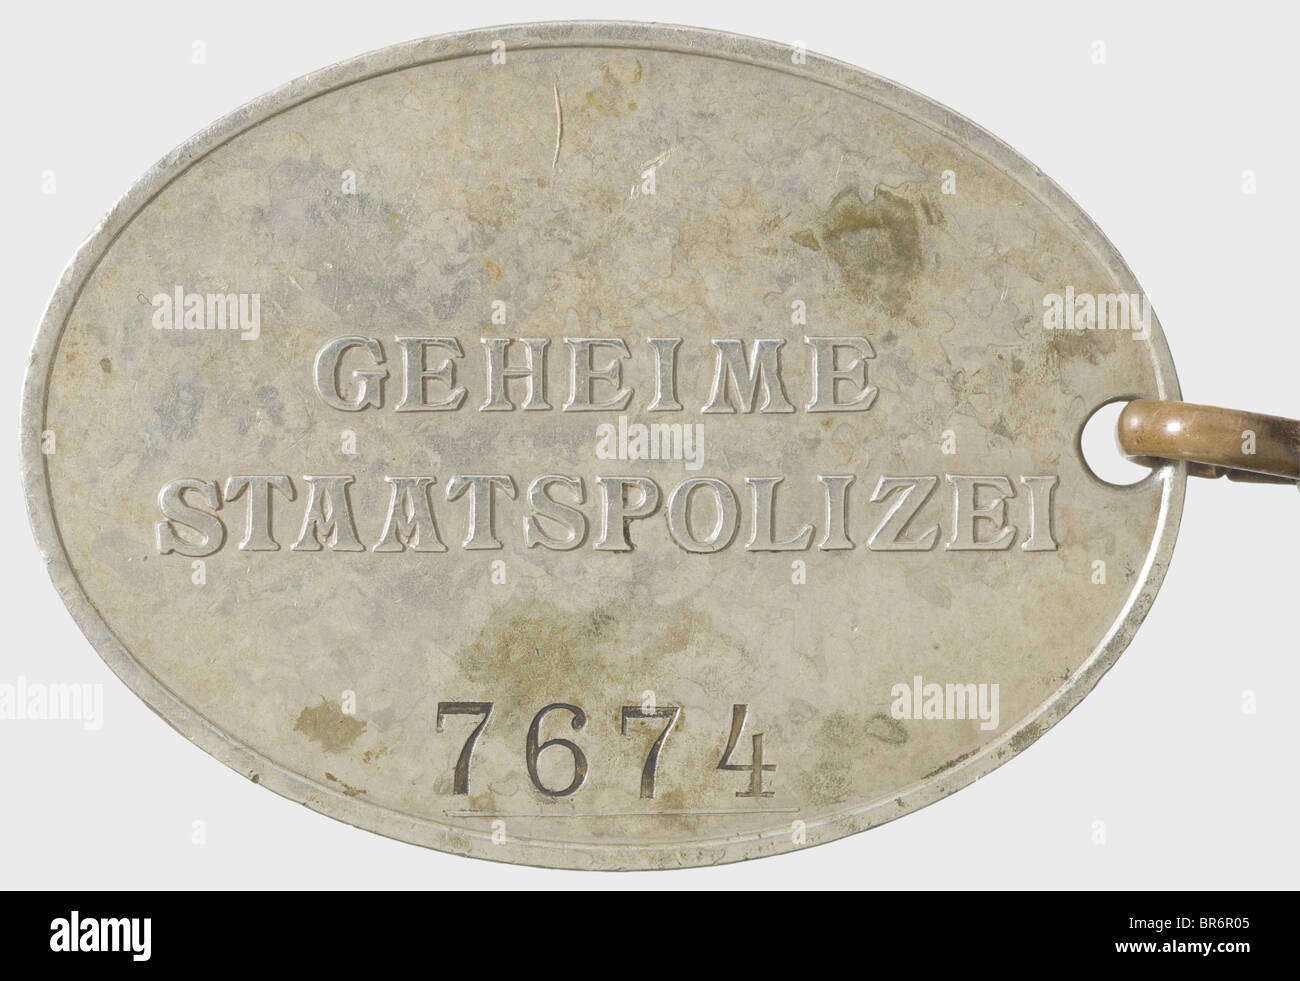 A badge '7674' of the GESTAPO., Nickel-silver, raised national eagle and the inscription 'GEHEIME STAATSPOLIZEI' (Secret State Police) in the typical caption, above the stamped number '7674'. Dimensions 37 x 51 mm. On a non-ferrous metal chain with snap hook and buttonhole toggle, also remnants of gilding. In addition an expertise of authenticity by Don Bible, September 2008. Of utmost rareness. historic, historical, 1930s, 1930s, 20th century, object, objects, stills, clipping, clippings, cut out, cut-out, cut-outs, insignia, symbols, symbol, emblem, emblems, Stock Photo